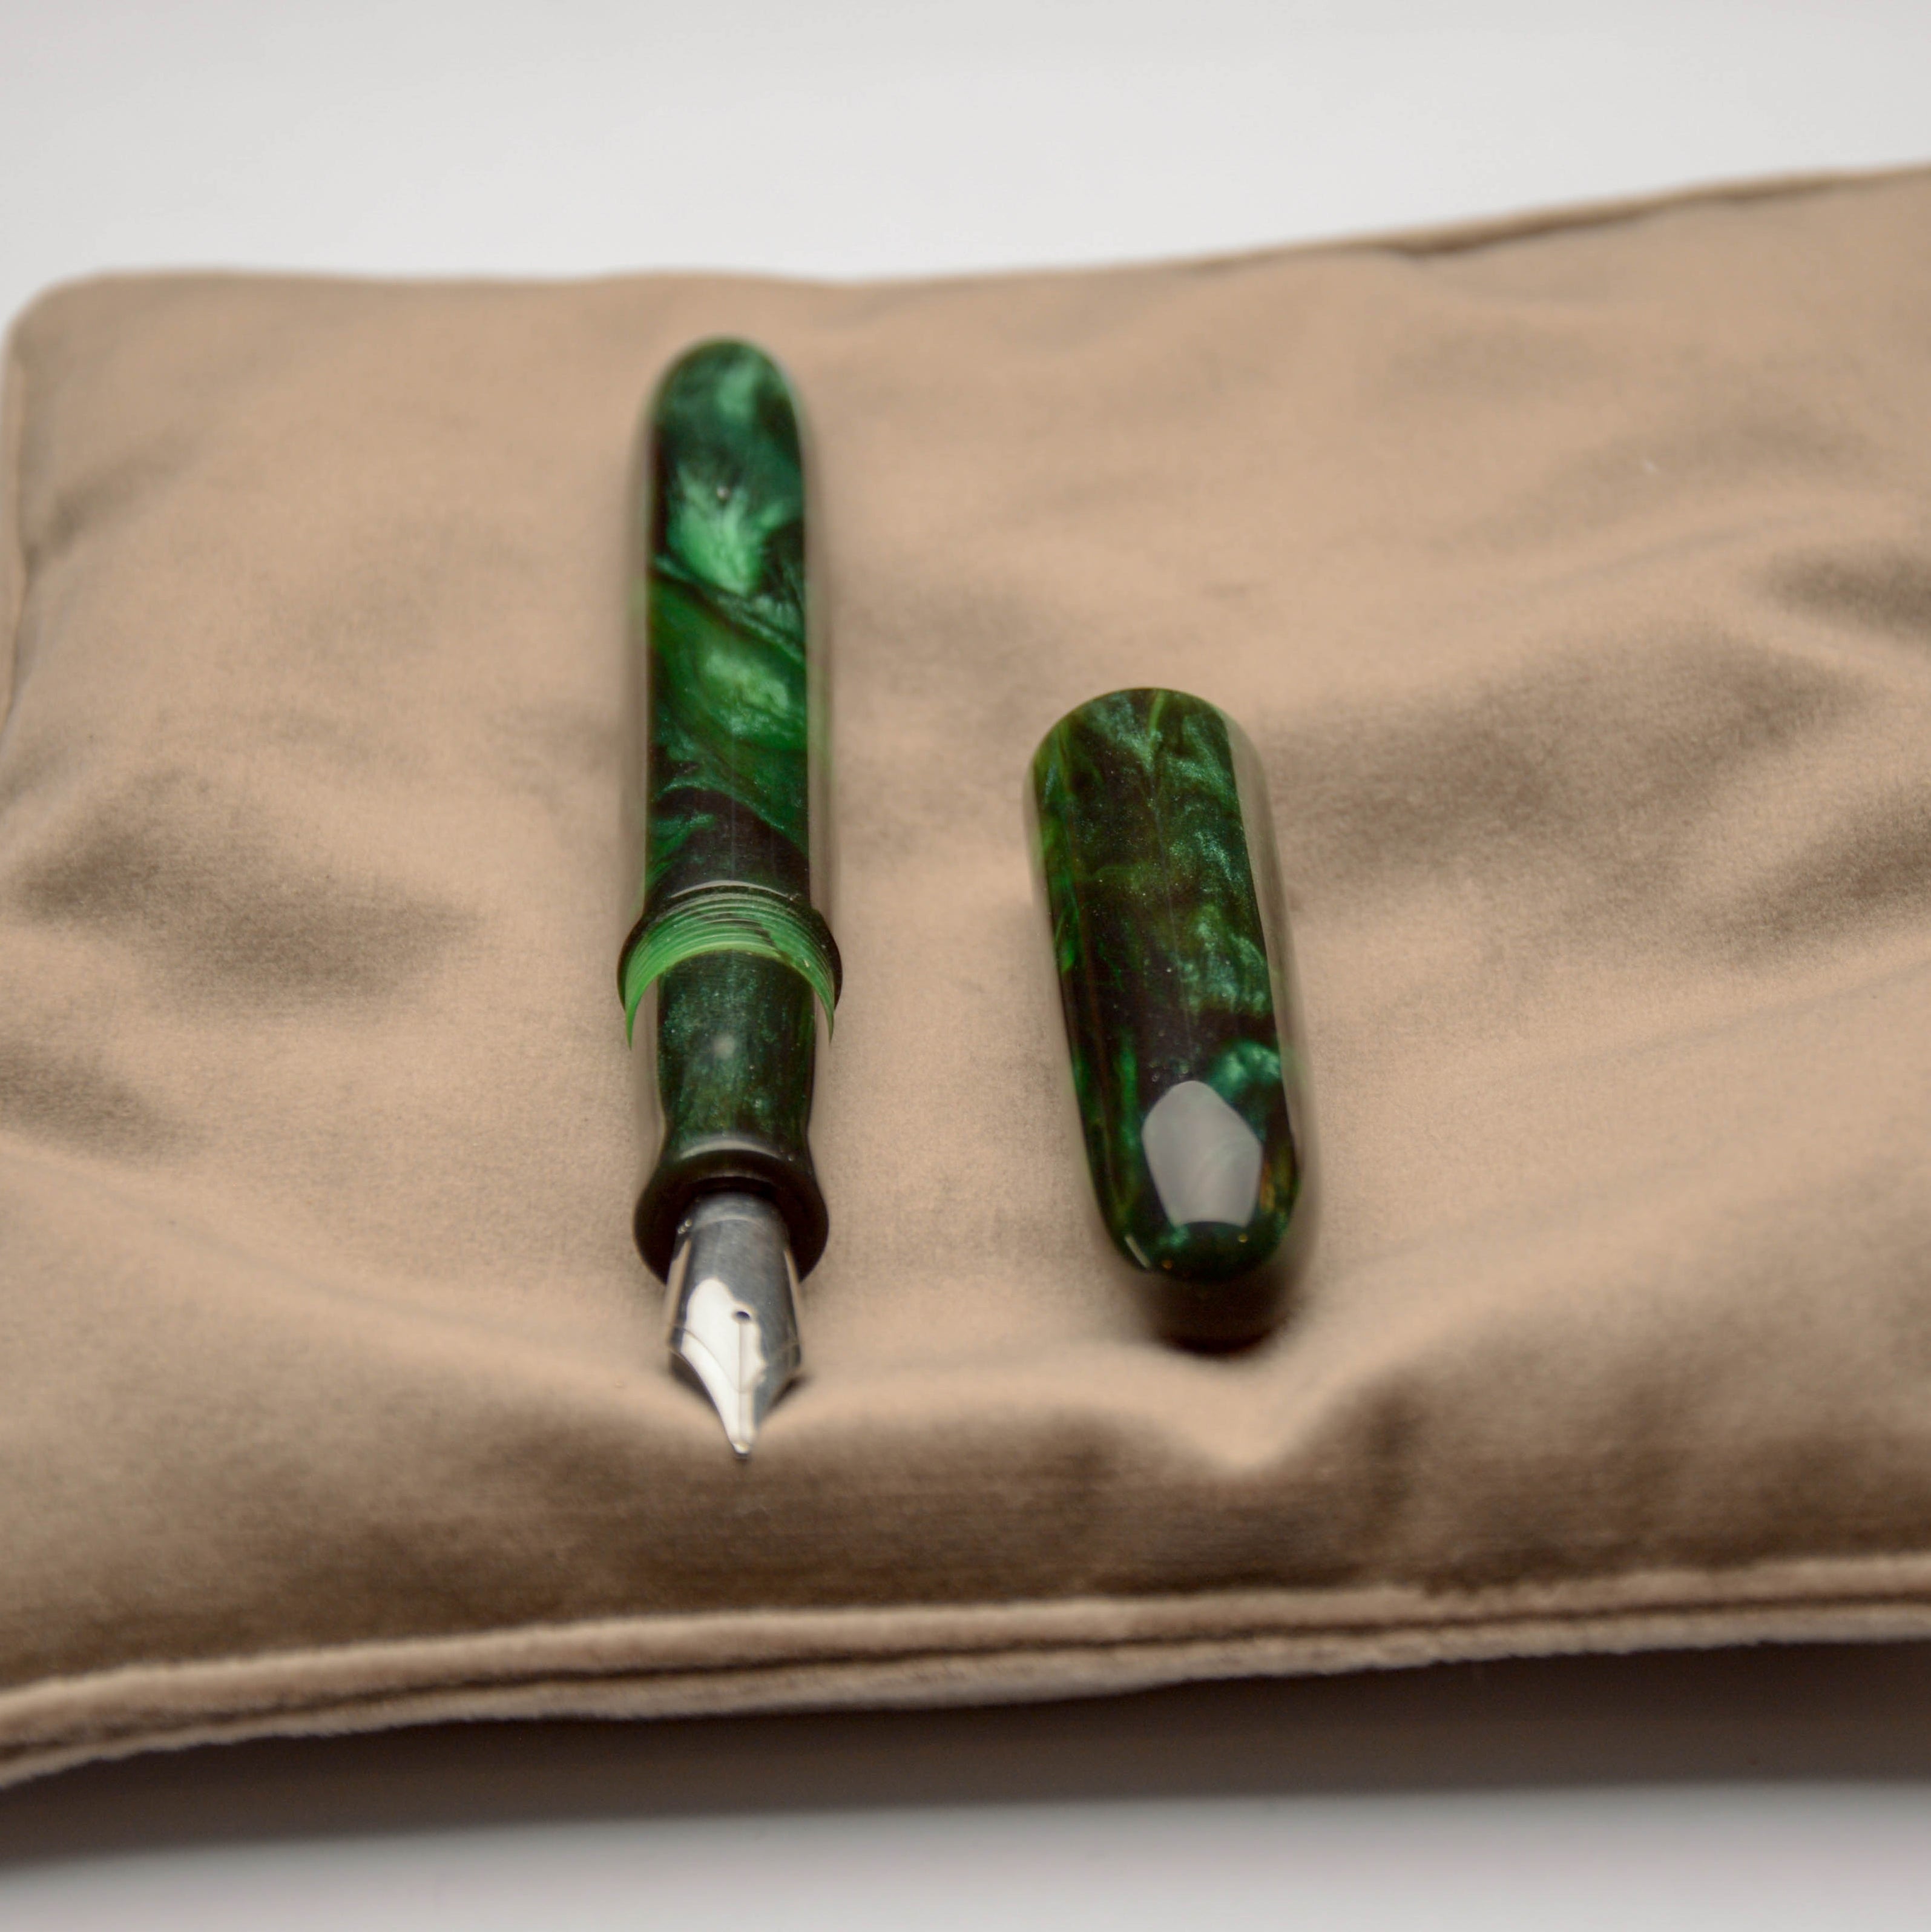 Fountain Pen - Jowo #6 - 13 mm - In-house green and black material